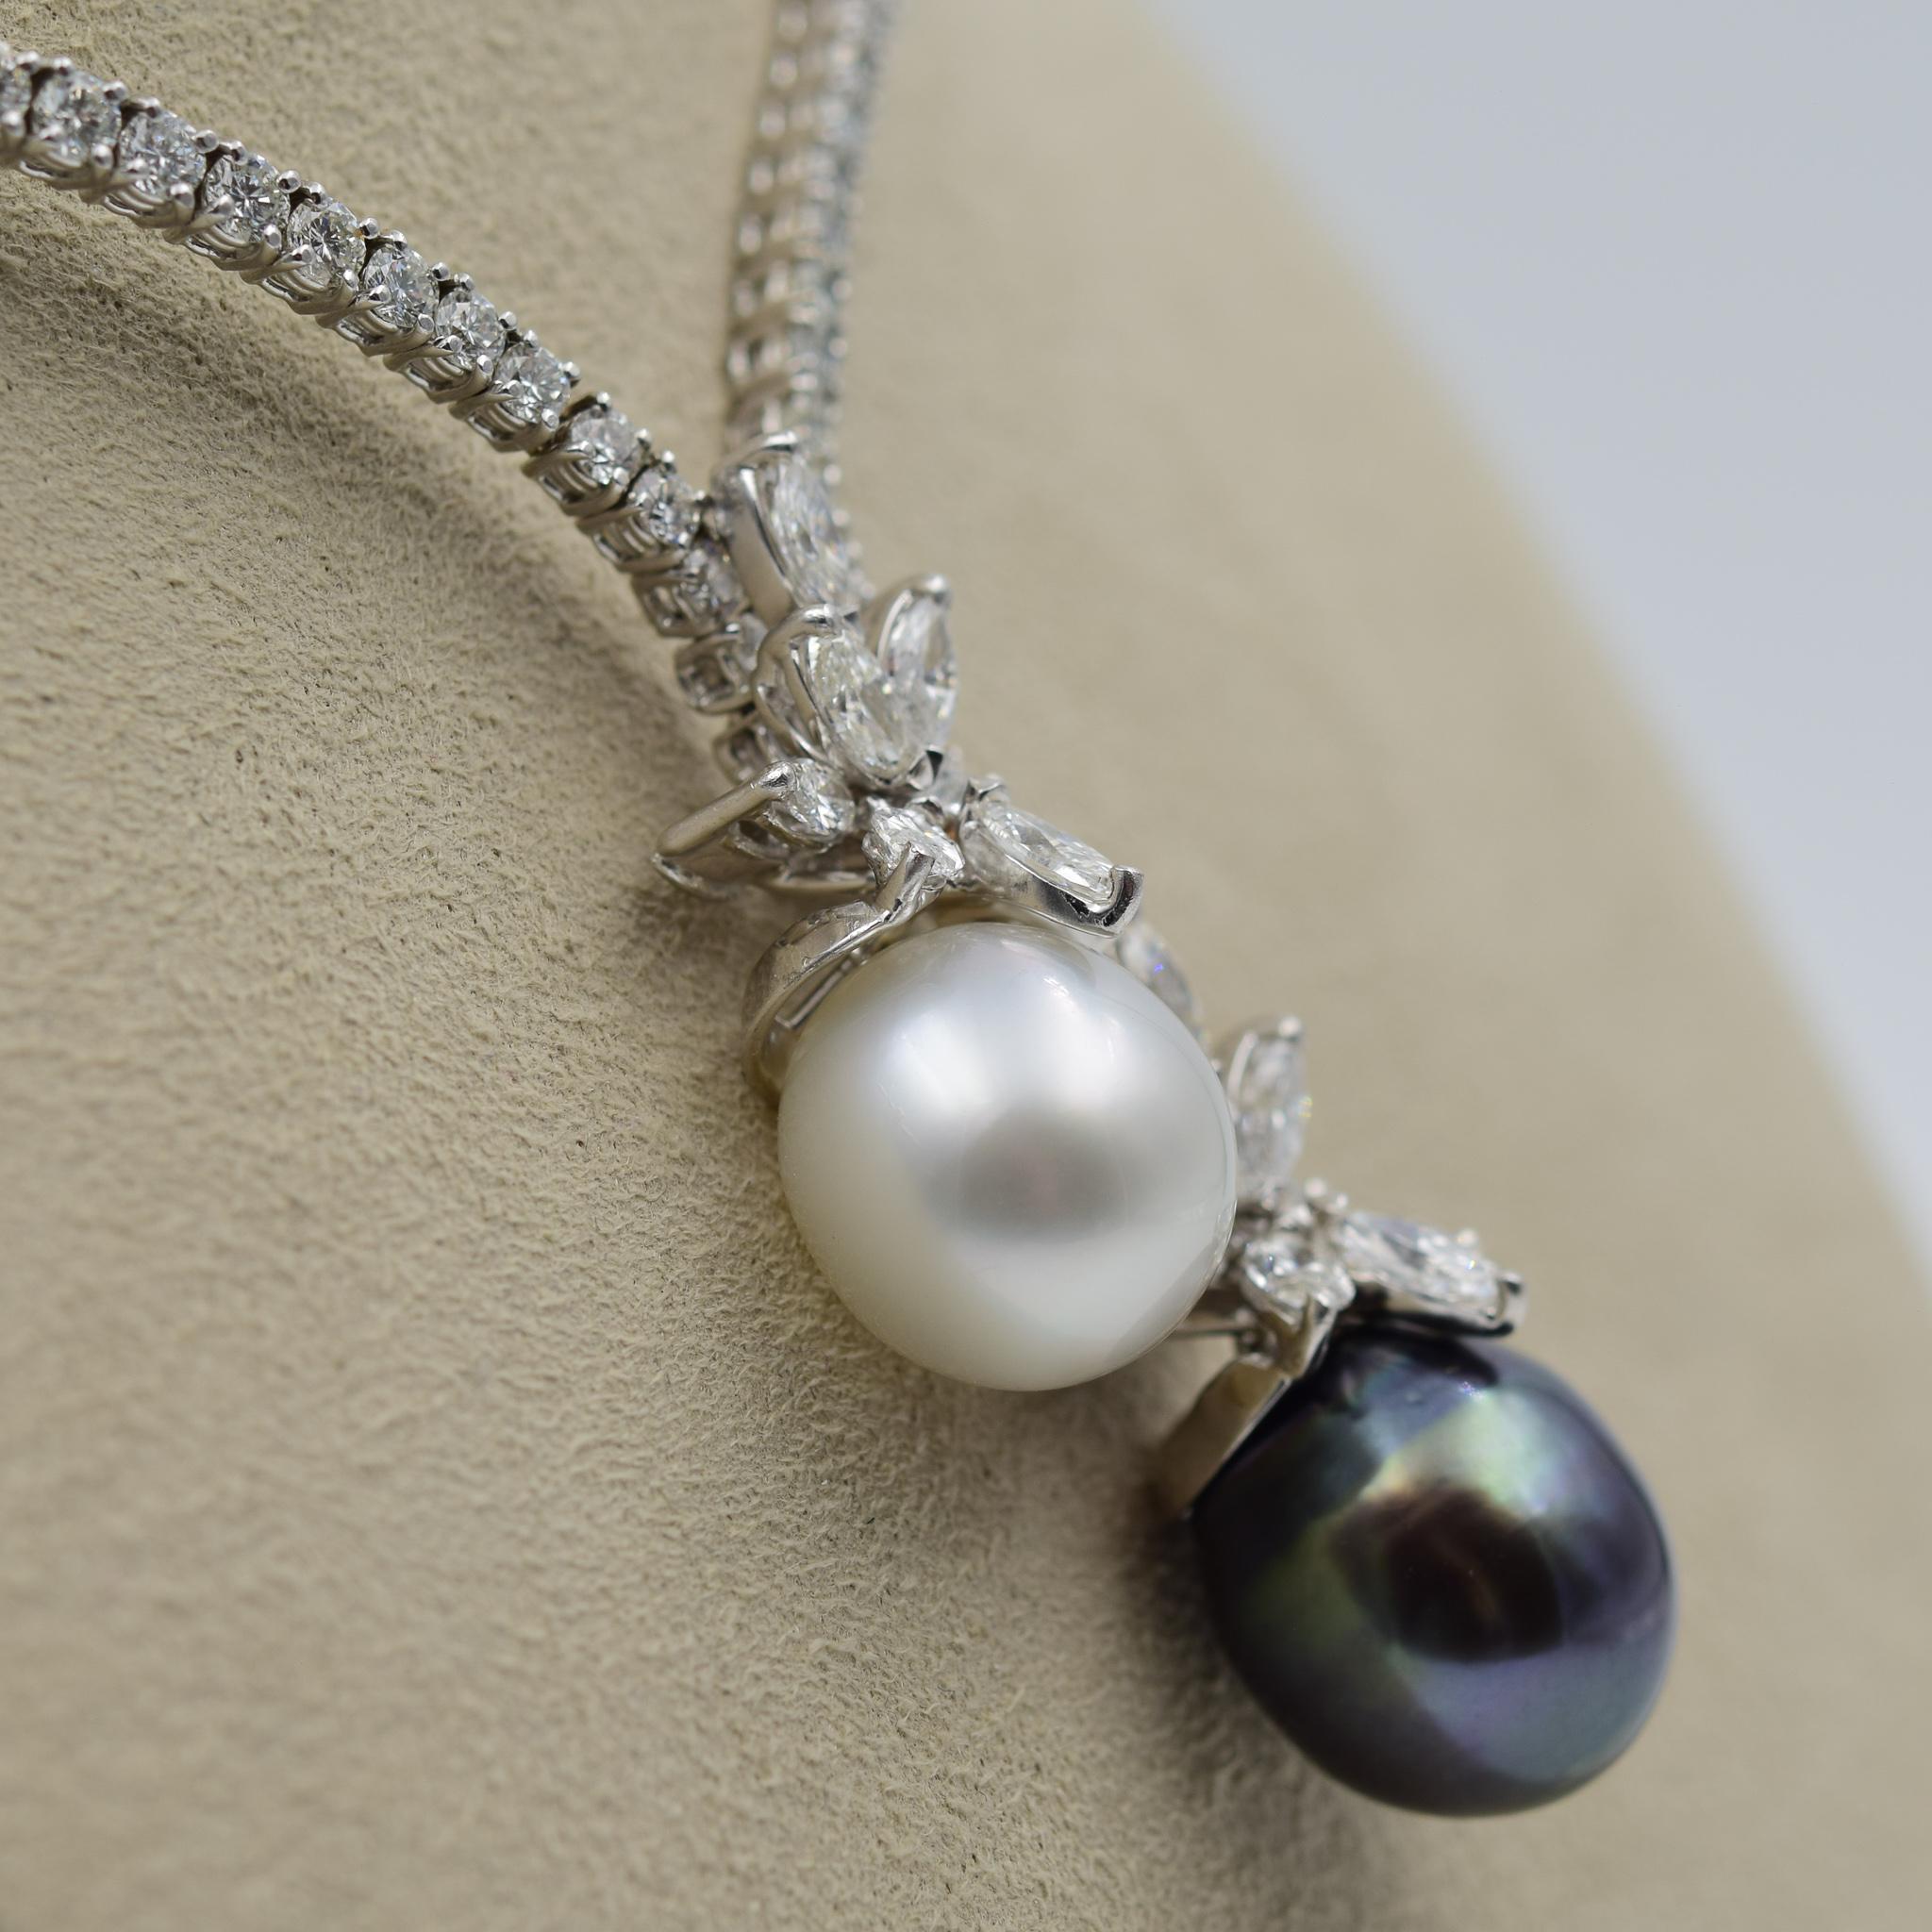 Round Cut Stefan Hafner 9.00 Carat Diamond Necklace with South Sea Tahitian Pearls